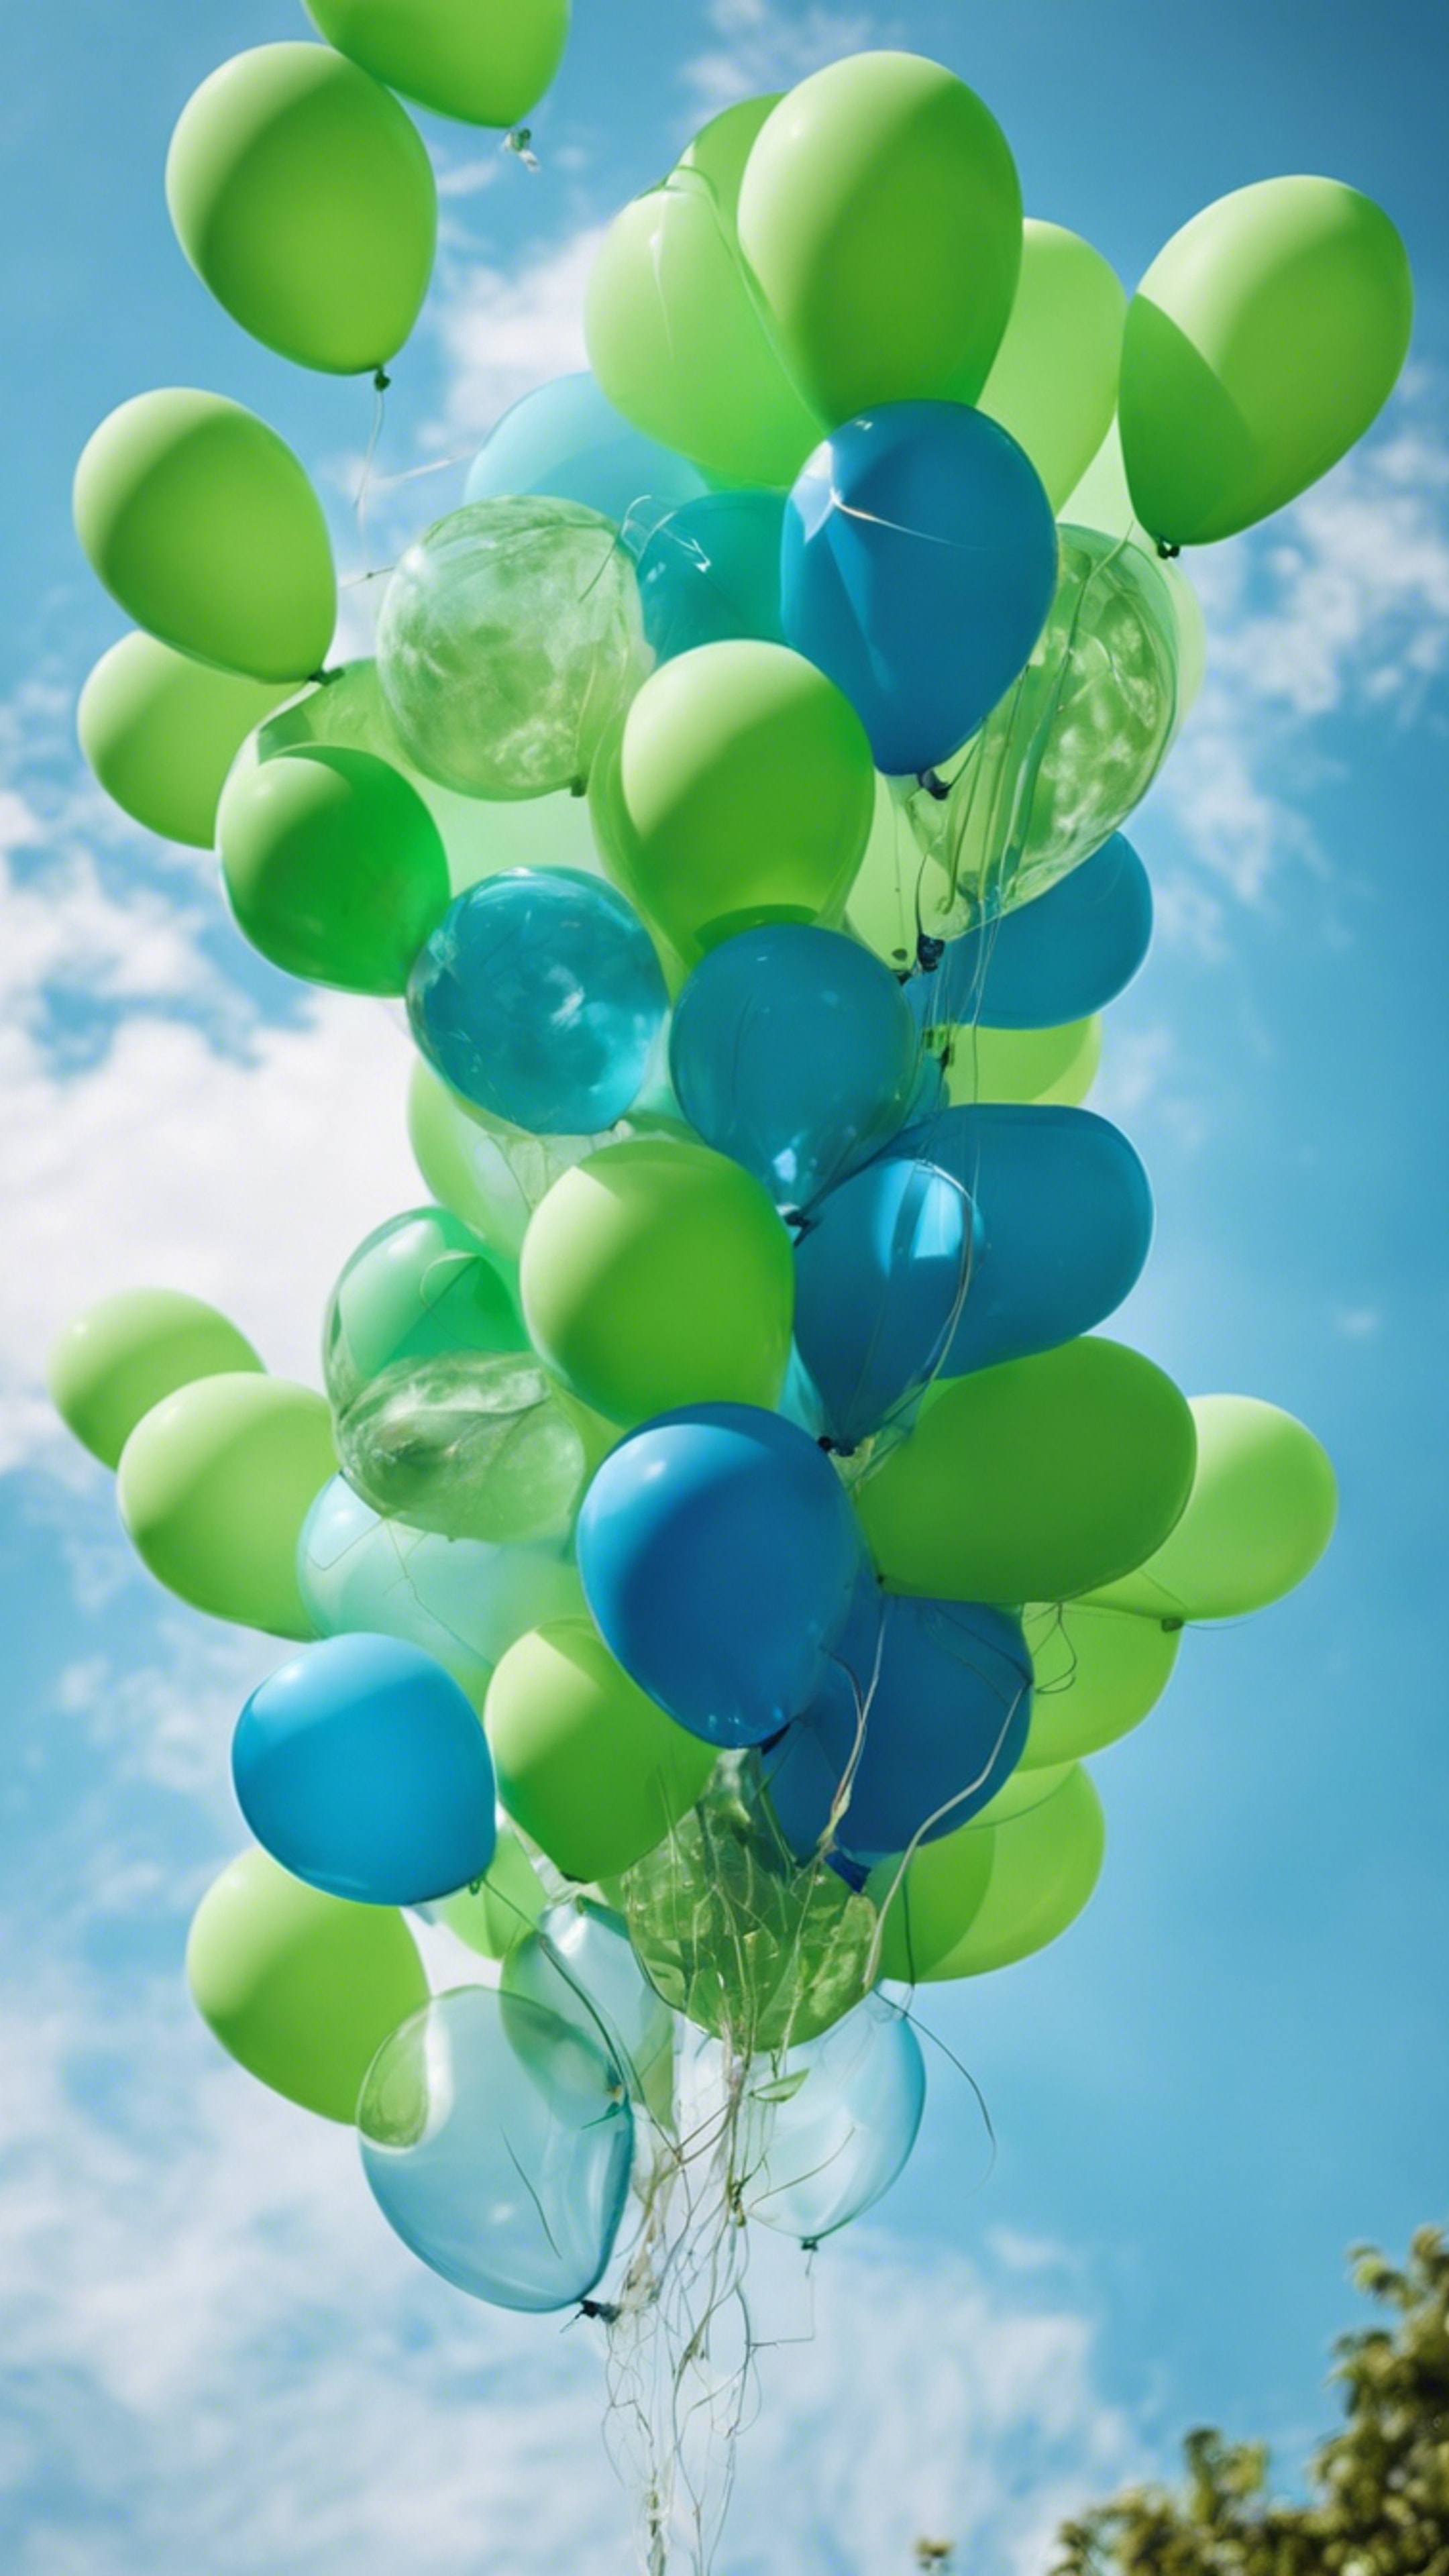 An array of blue and green balloons floating in a clear sky during the day. Hintergrund[0f6c85f120014fa1a128]